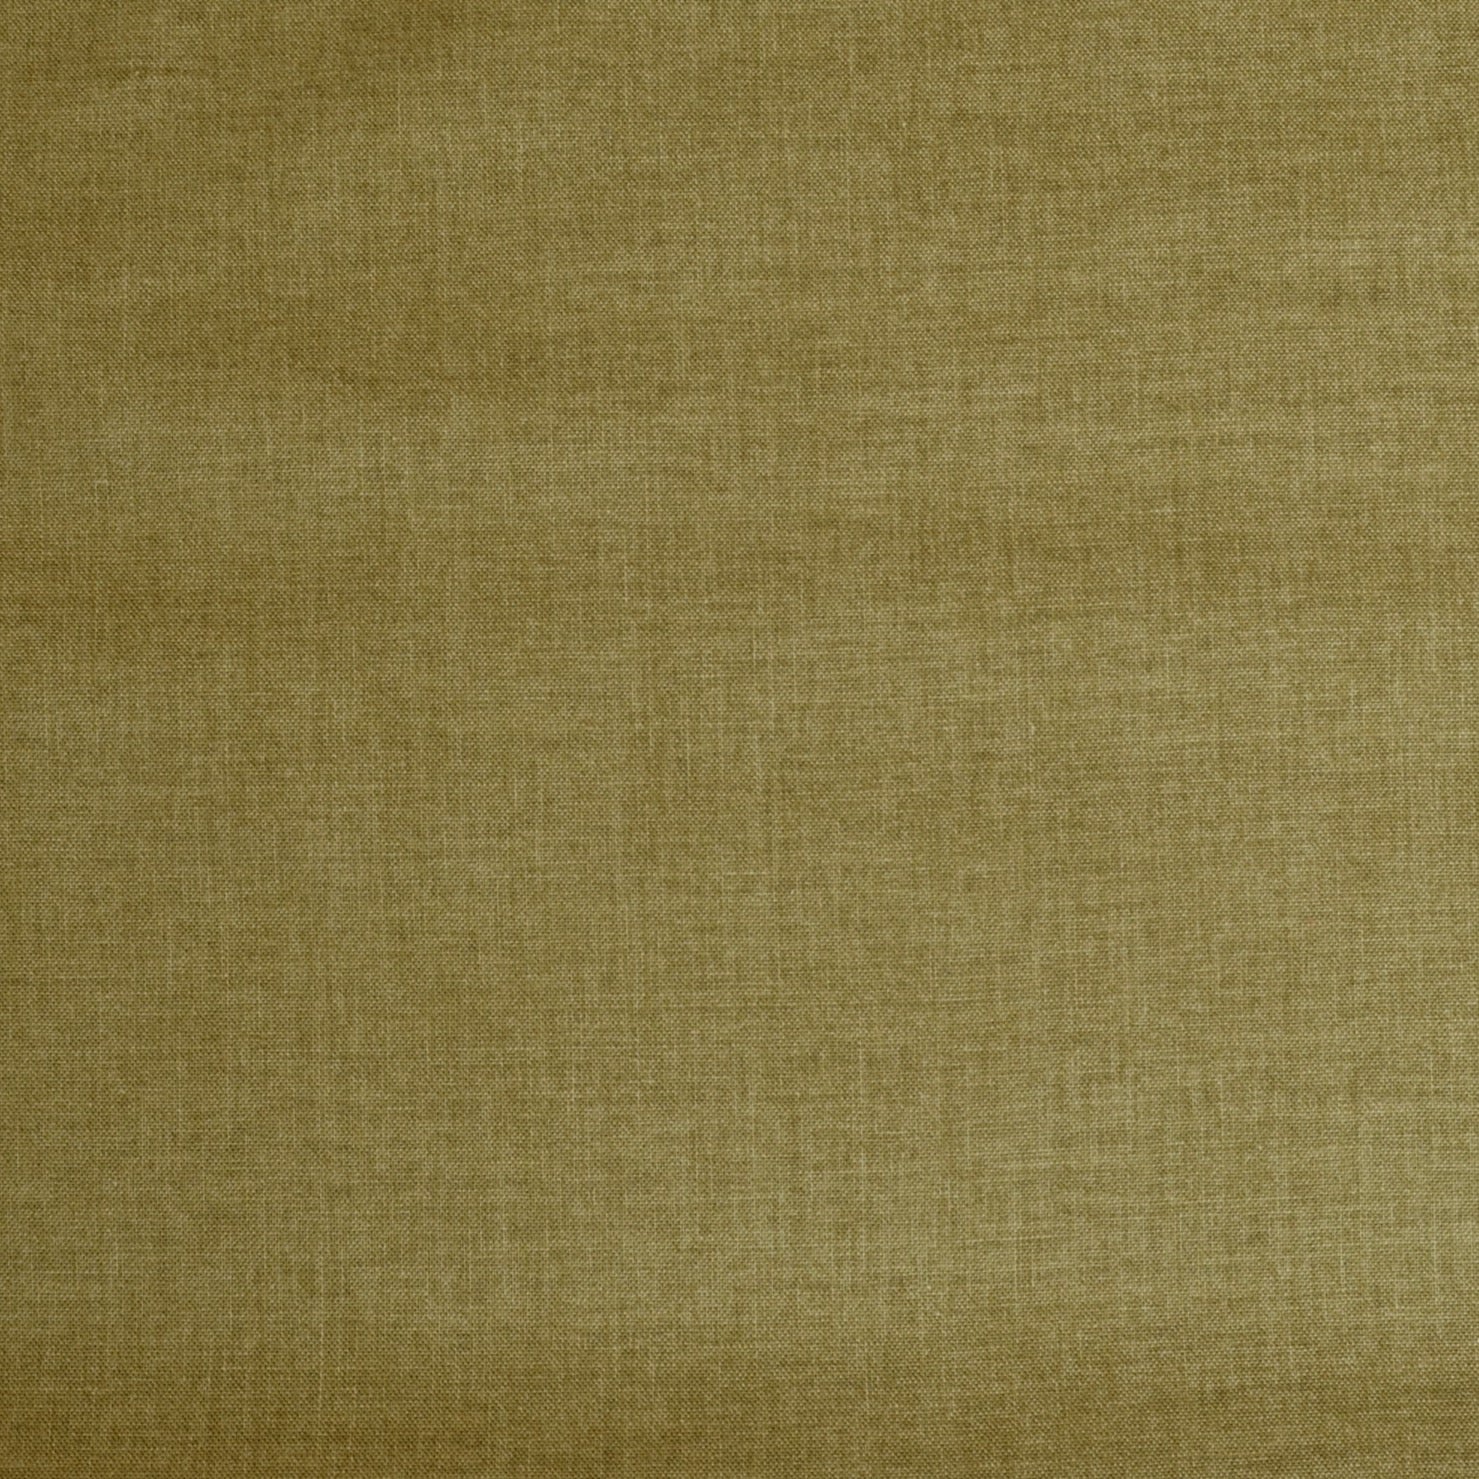 Olive green cotton fabric